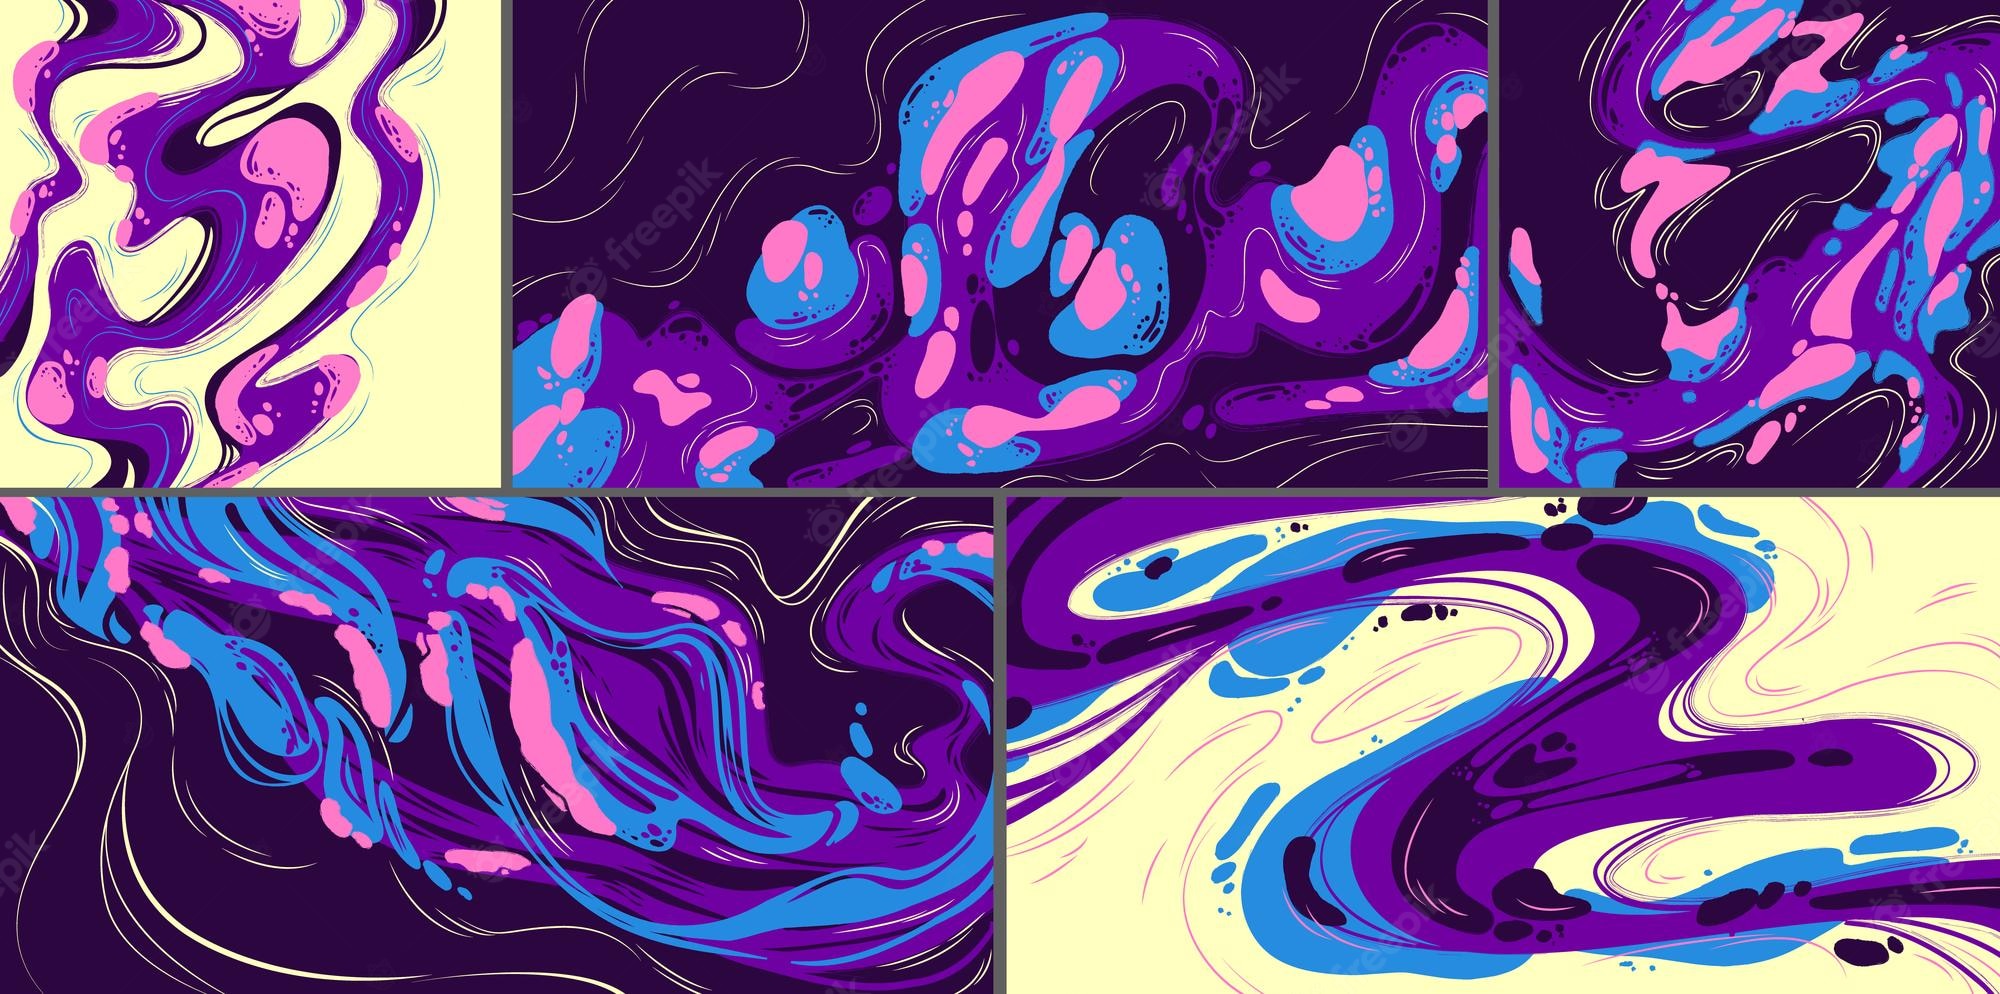 Abstract Swirl Wallpapers